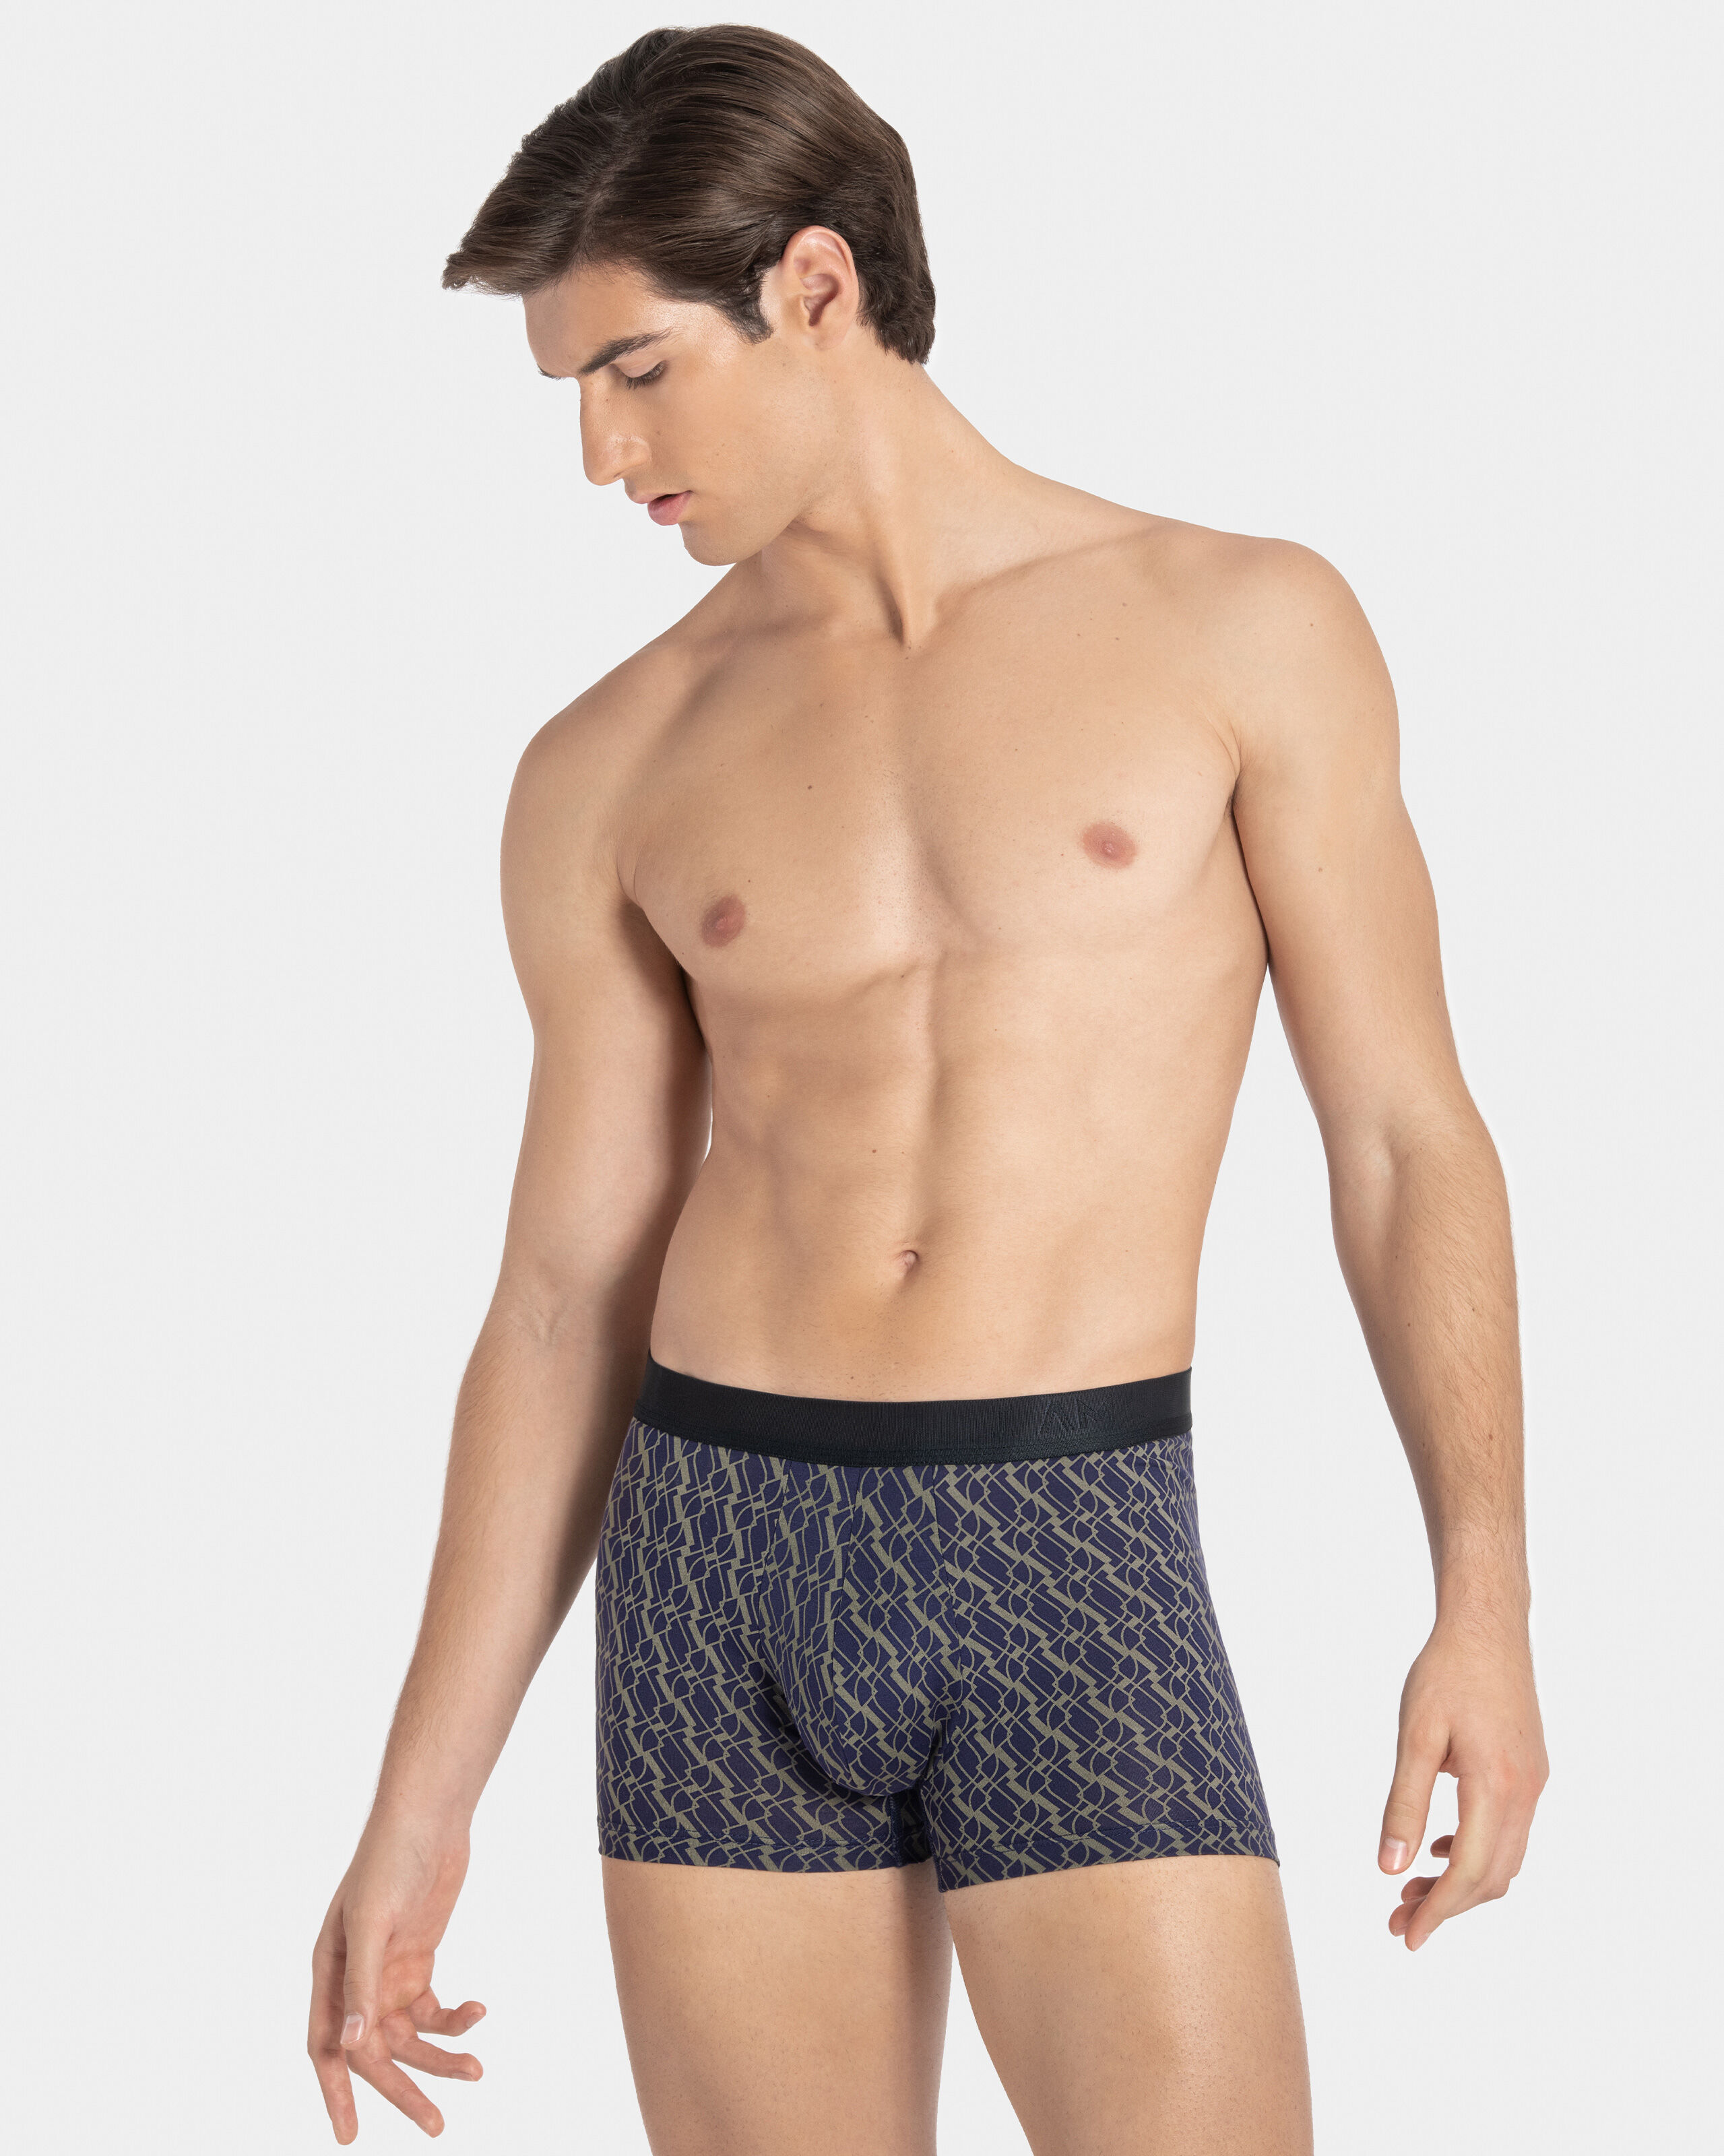 IBYIMPETUS Pack2 boxers de hombre Lyocell VIOLETA (S)